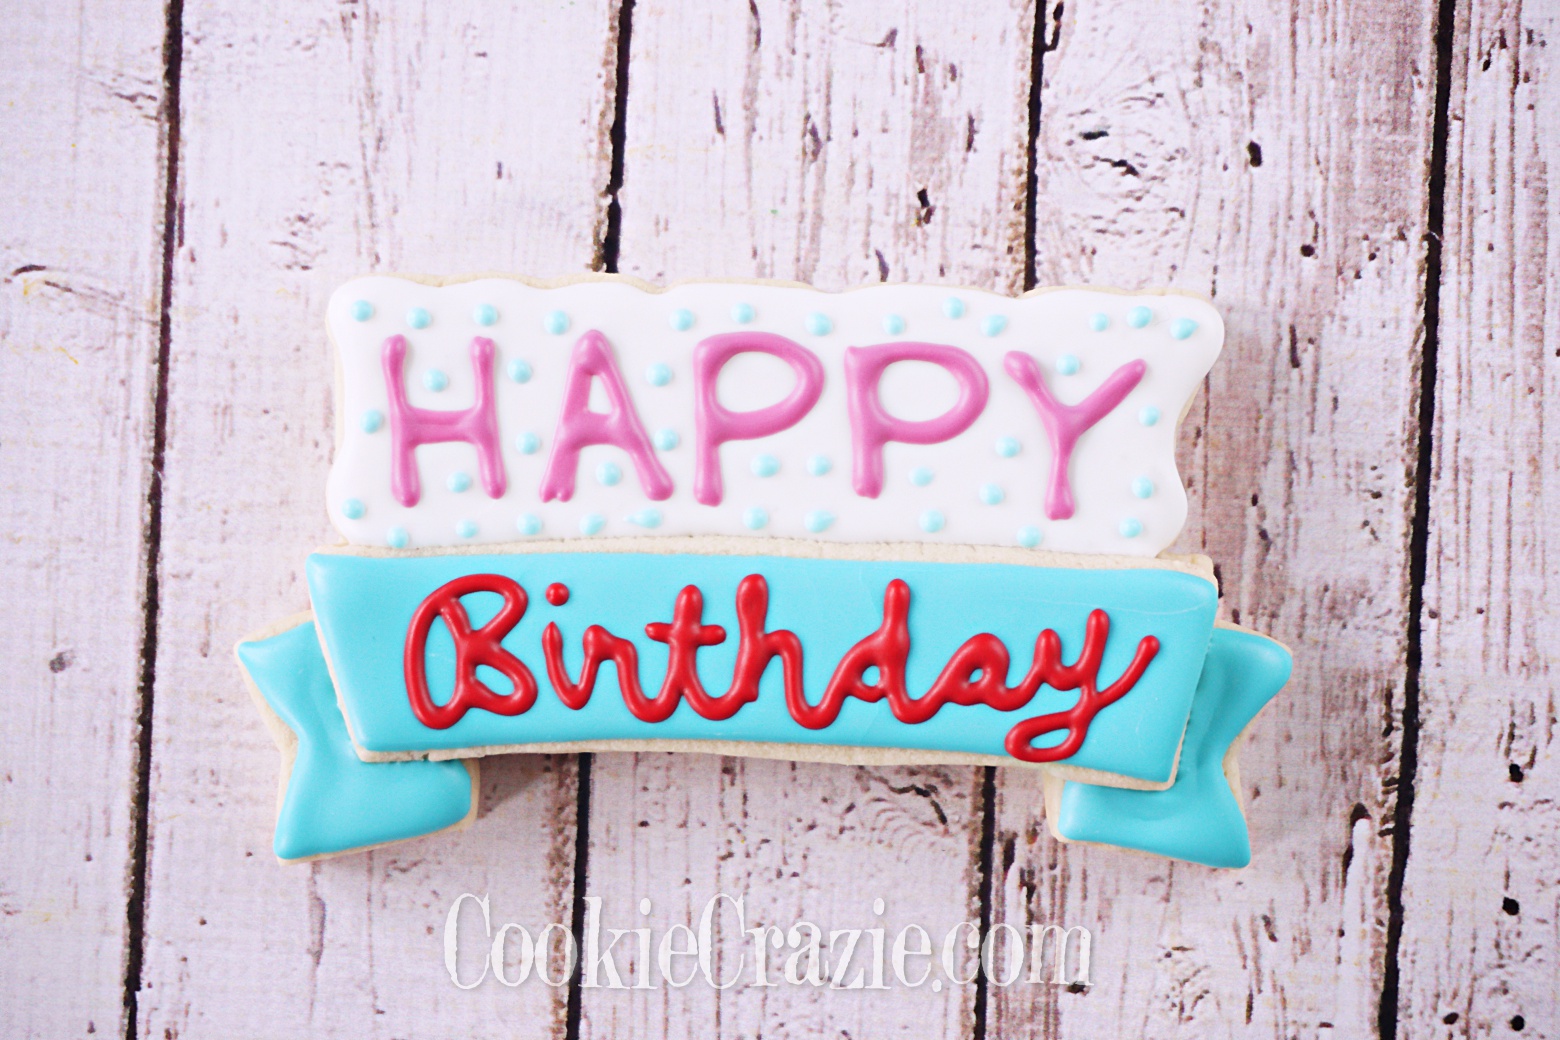  Happy Birthday Banner Decorated Sugar Cookie YouTube video  HERE  